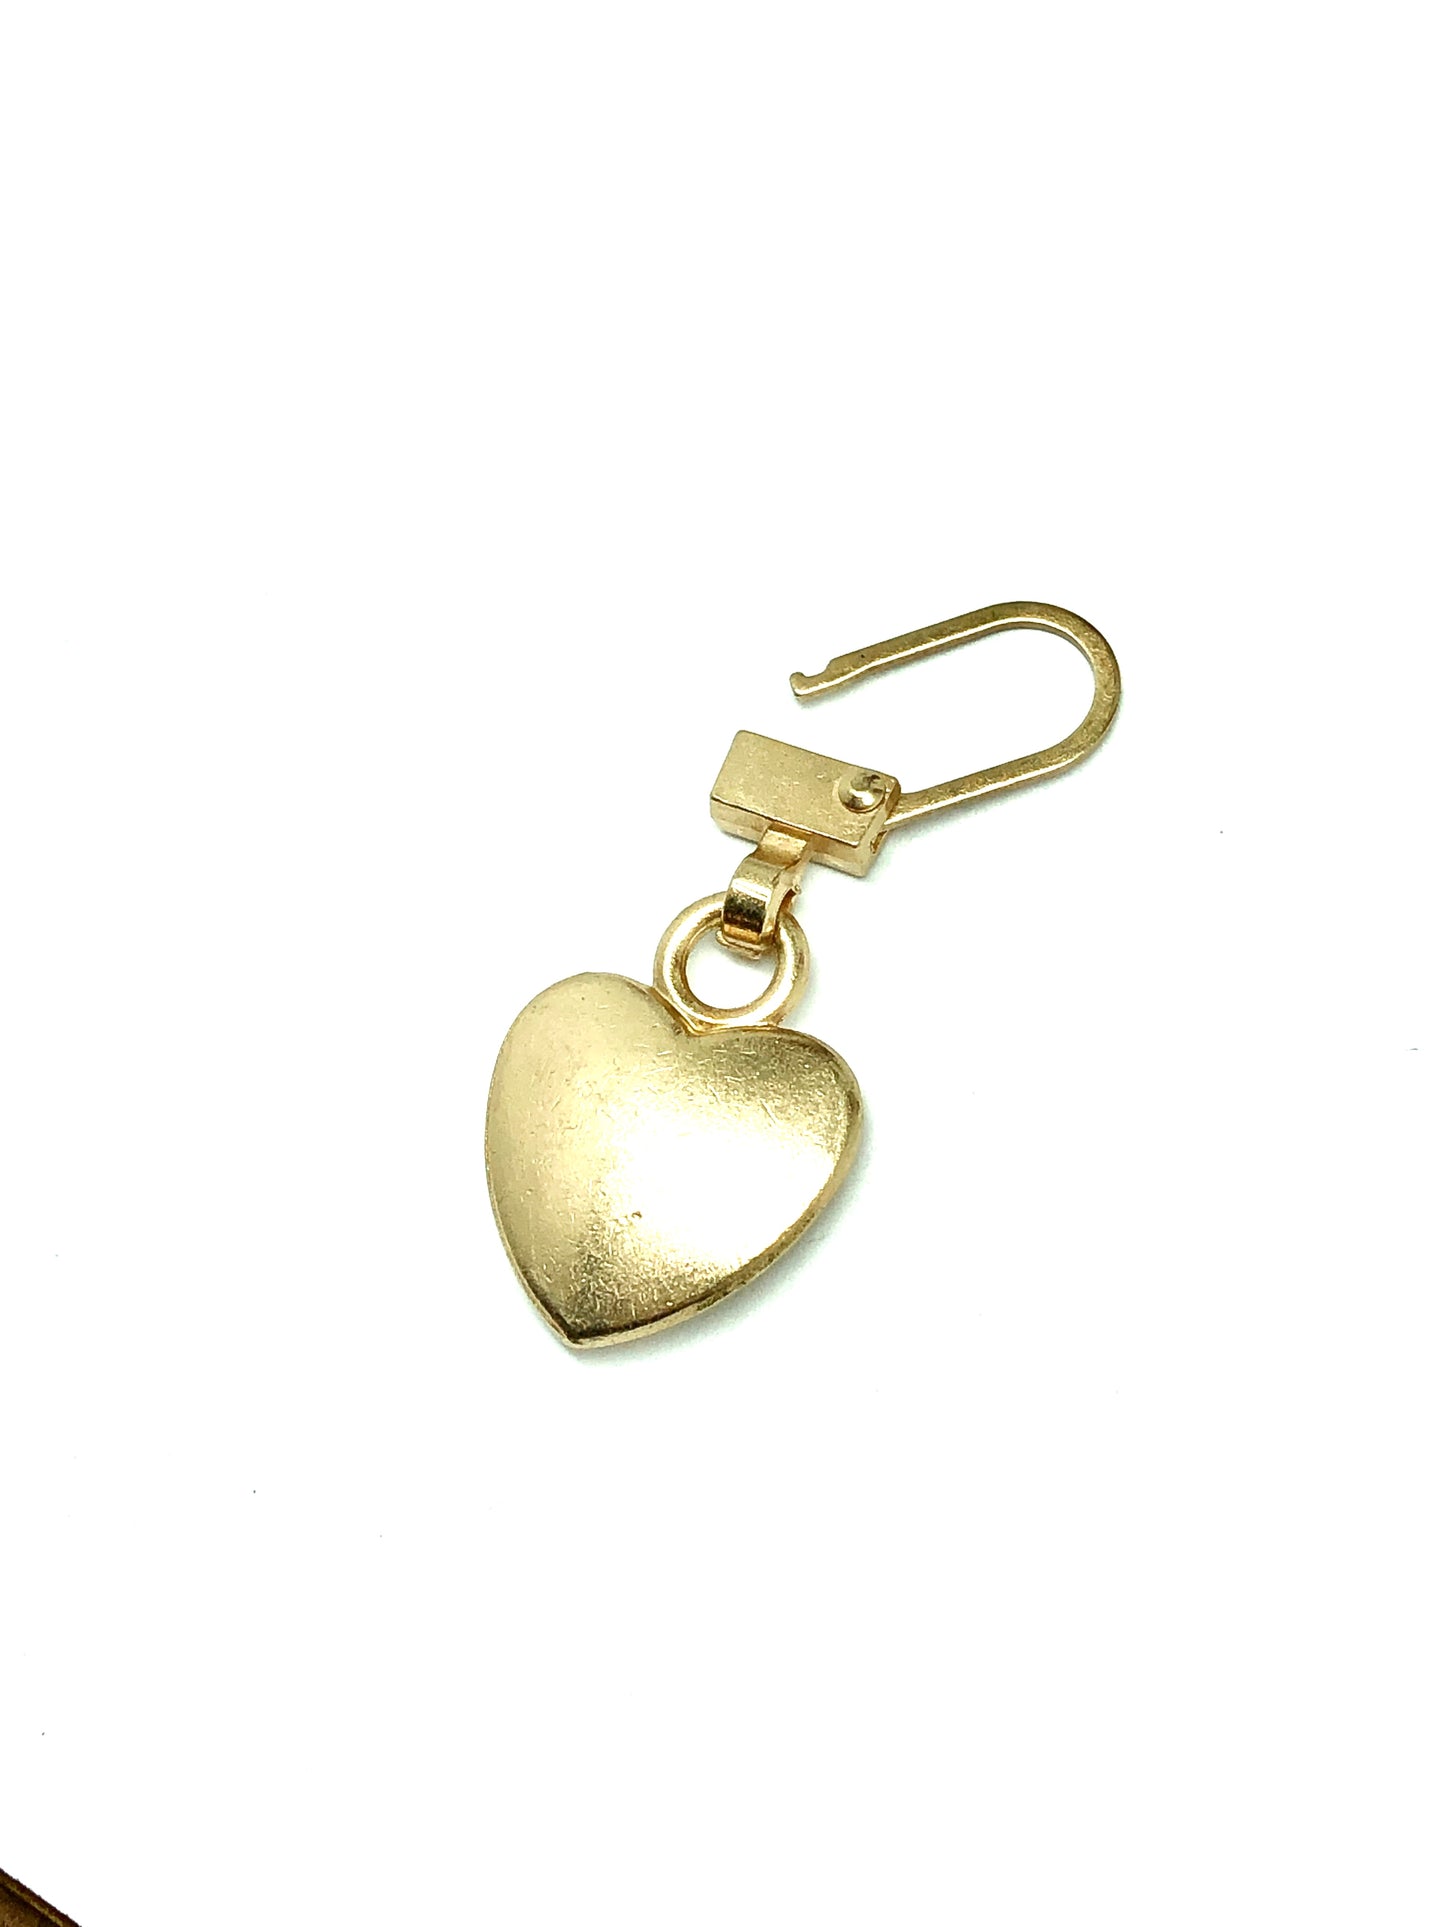 Zipper Pull Repair Heart Charm - Rustic Rose Gold for Repair or Decorate anything it can clip onto!